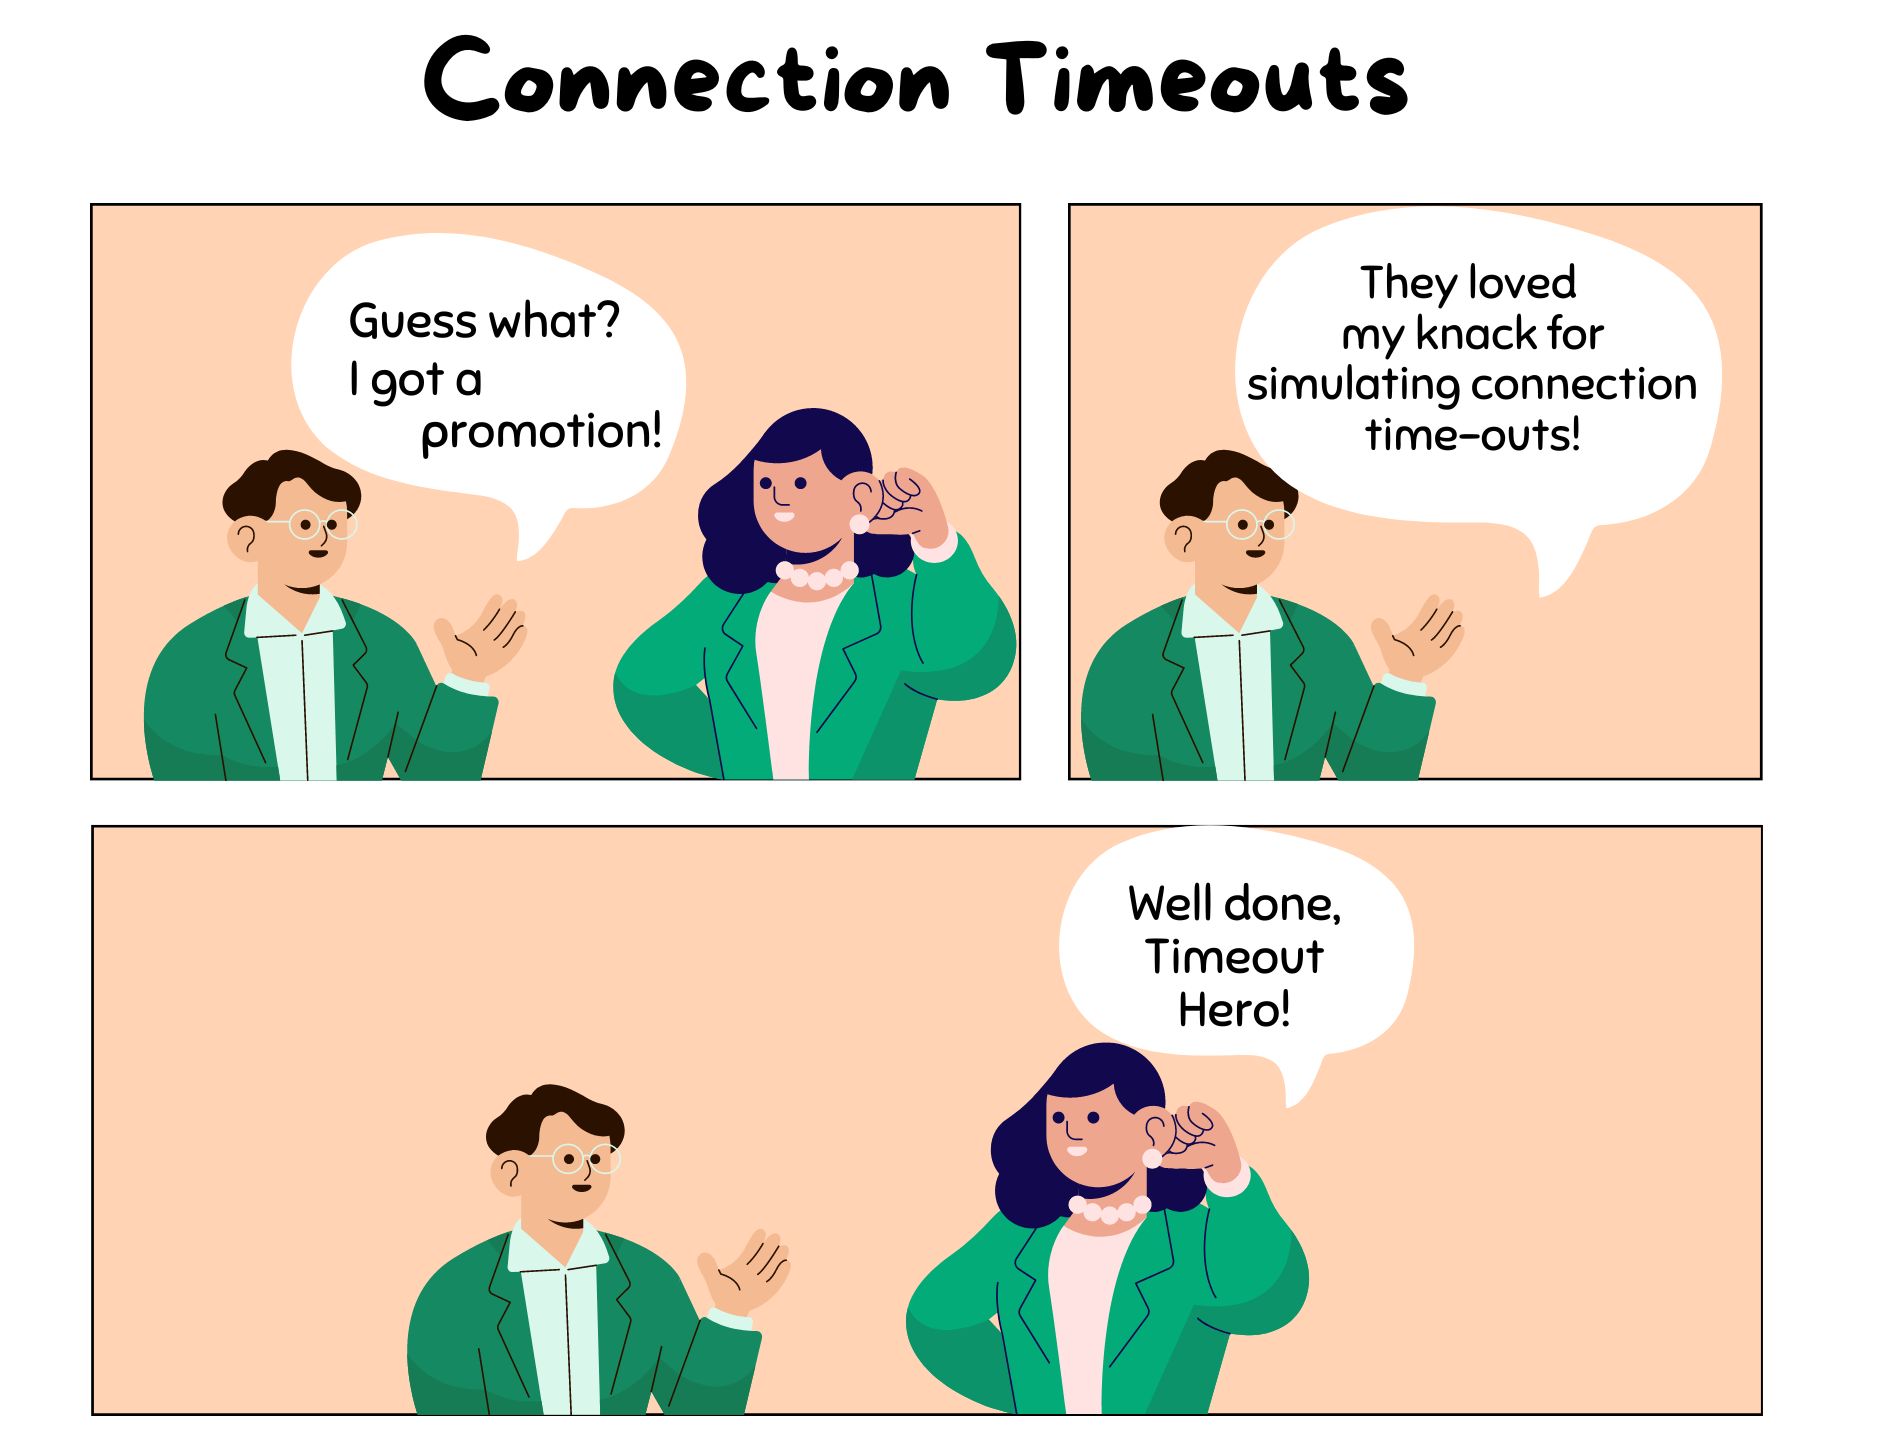 TCP connection timeout humour comic strip